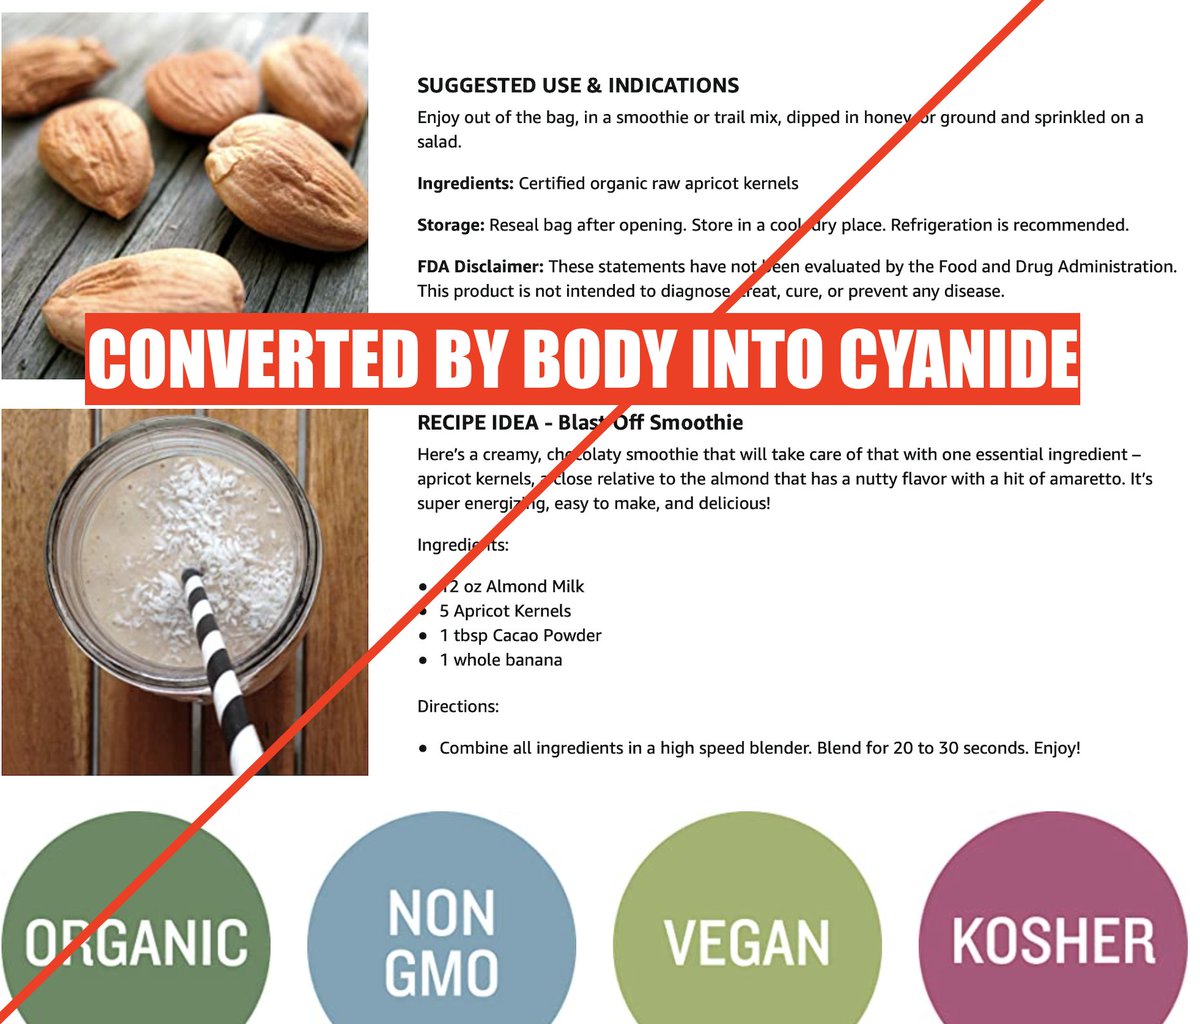 Amazon has a poisonous quackery problem. Time to call it out. #1 "Apricot kernel powder" is anti-cancer quackery.It is converted by your body into... CYANIDE. Make a smoothie & get poisoned.Lots of it Amazon. Even an "Amazon's Choice"